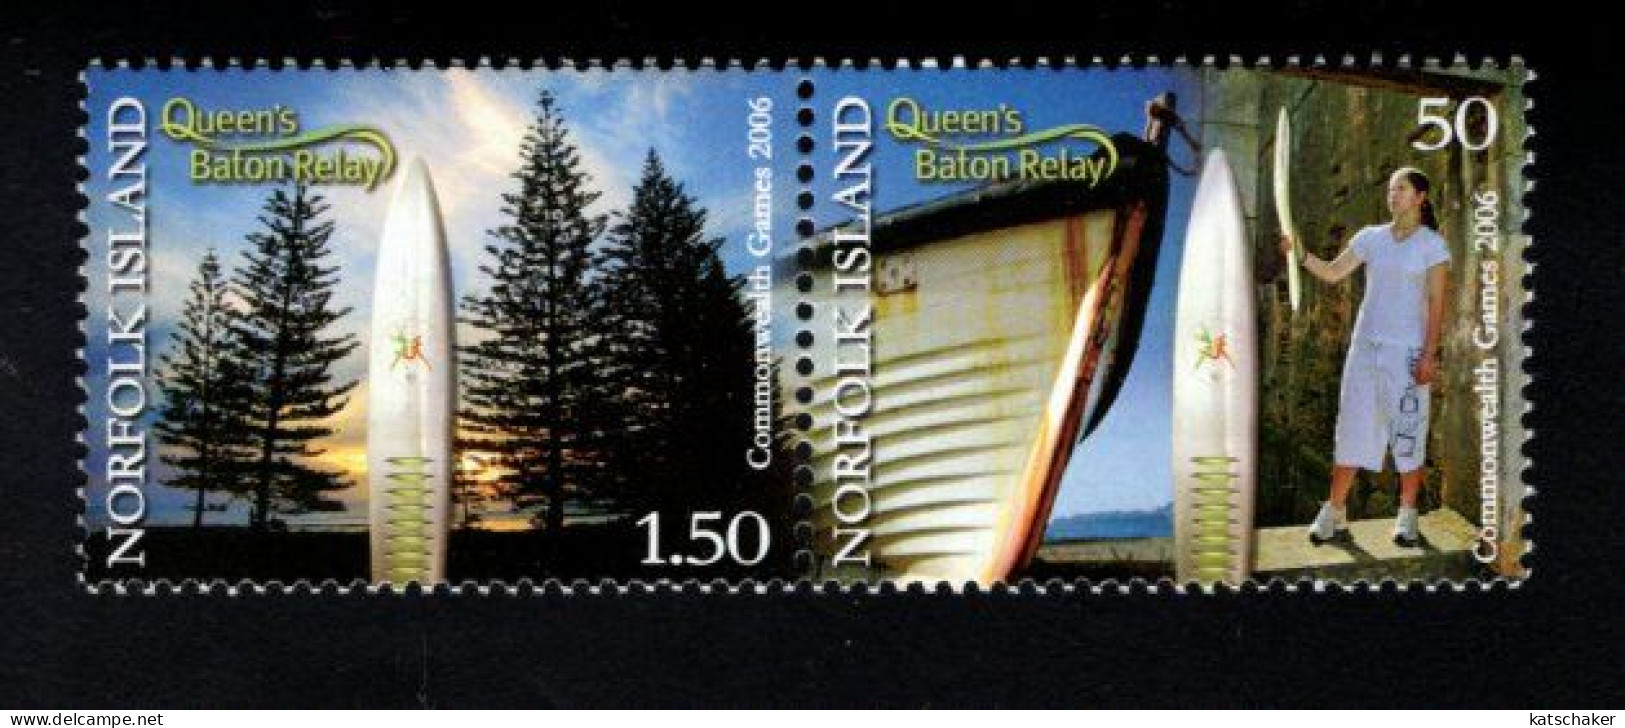 1960138276 2006 SCOTT 866  (XX)  POSTFRIS MINT NEVER HINGED - QUEEN'S  BATON RELAY FOR 2006 COMMONWEALTH GAMES - Norfolk Island